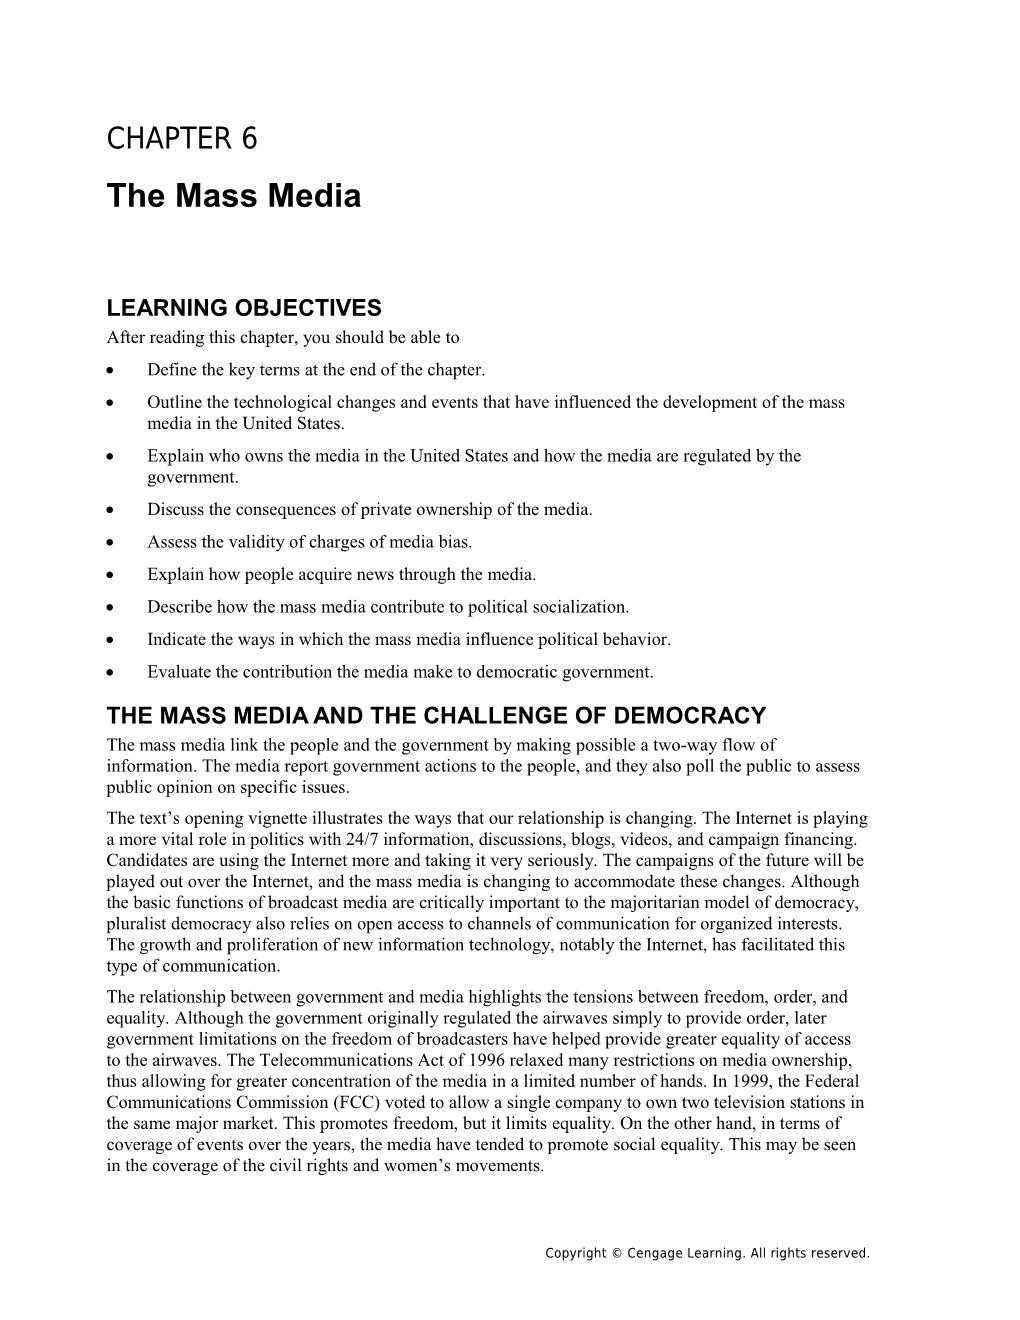 Chapter 6: the Mass Media 63